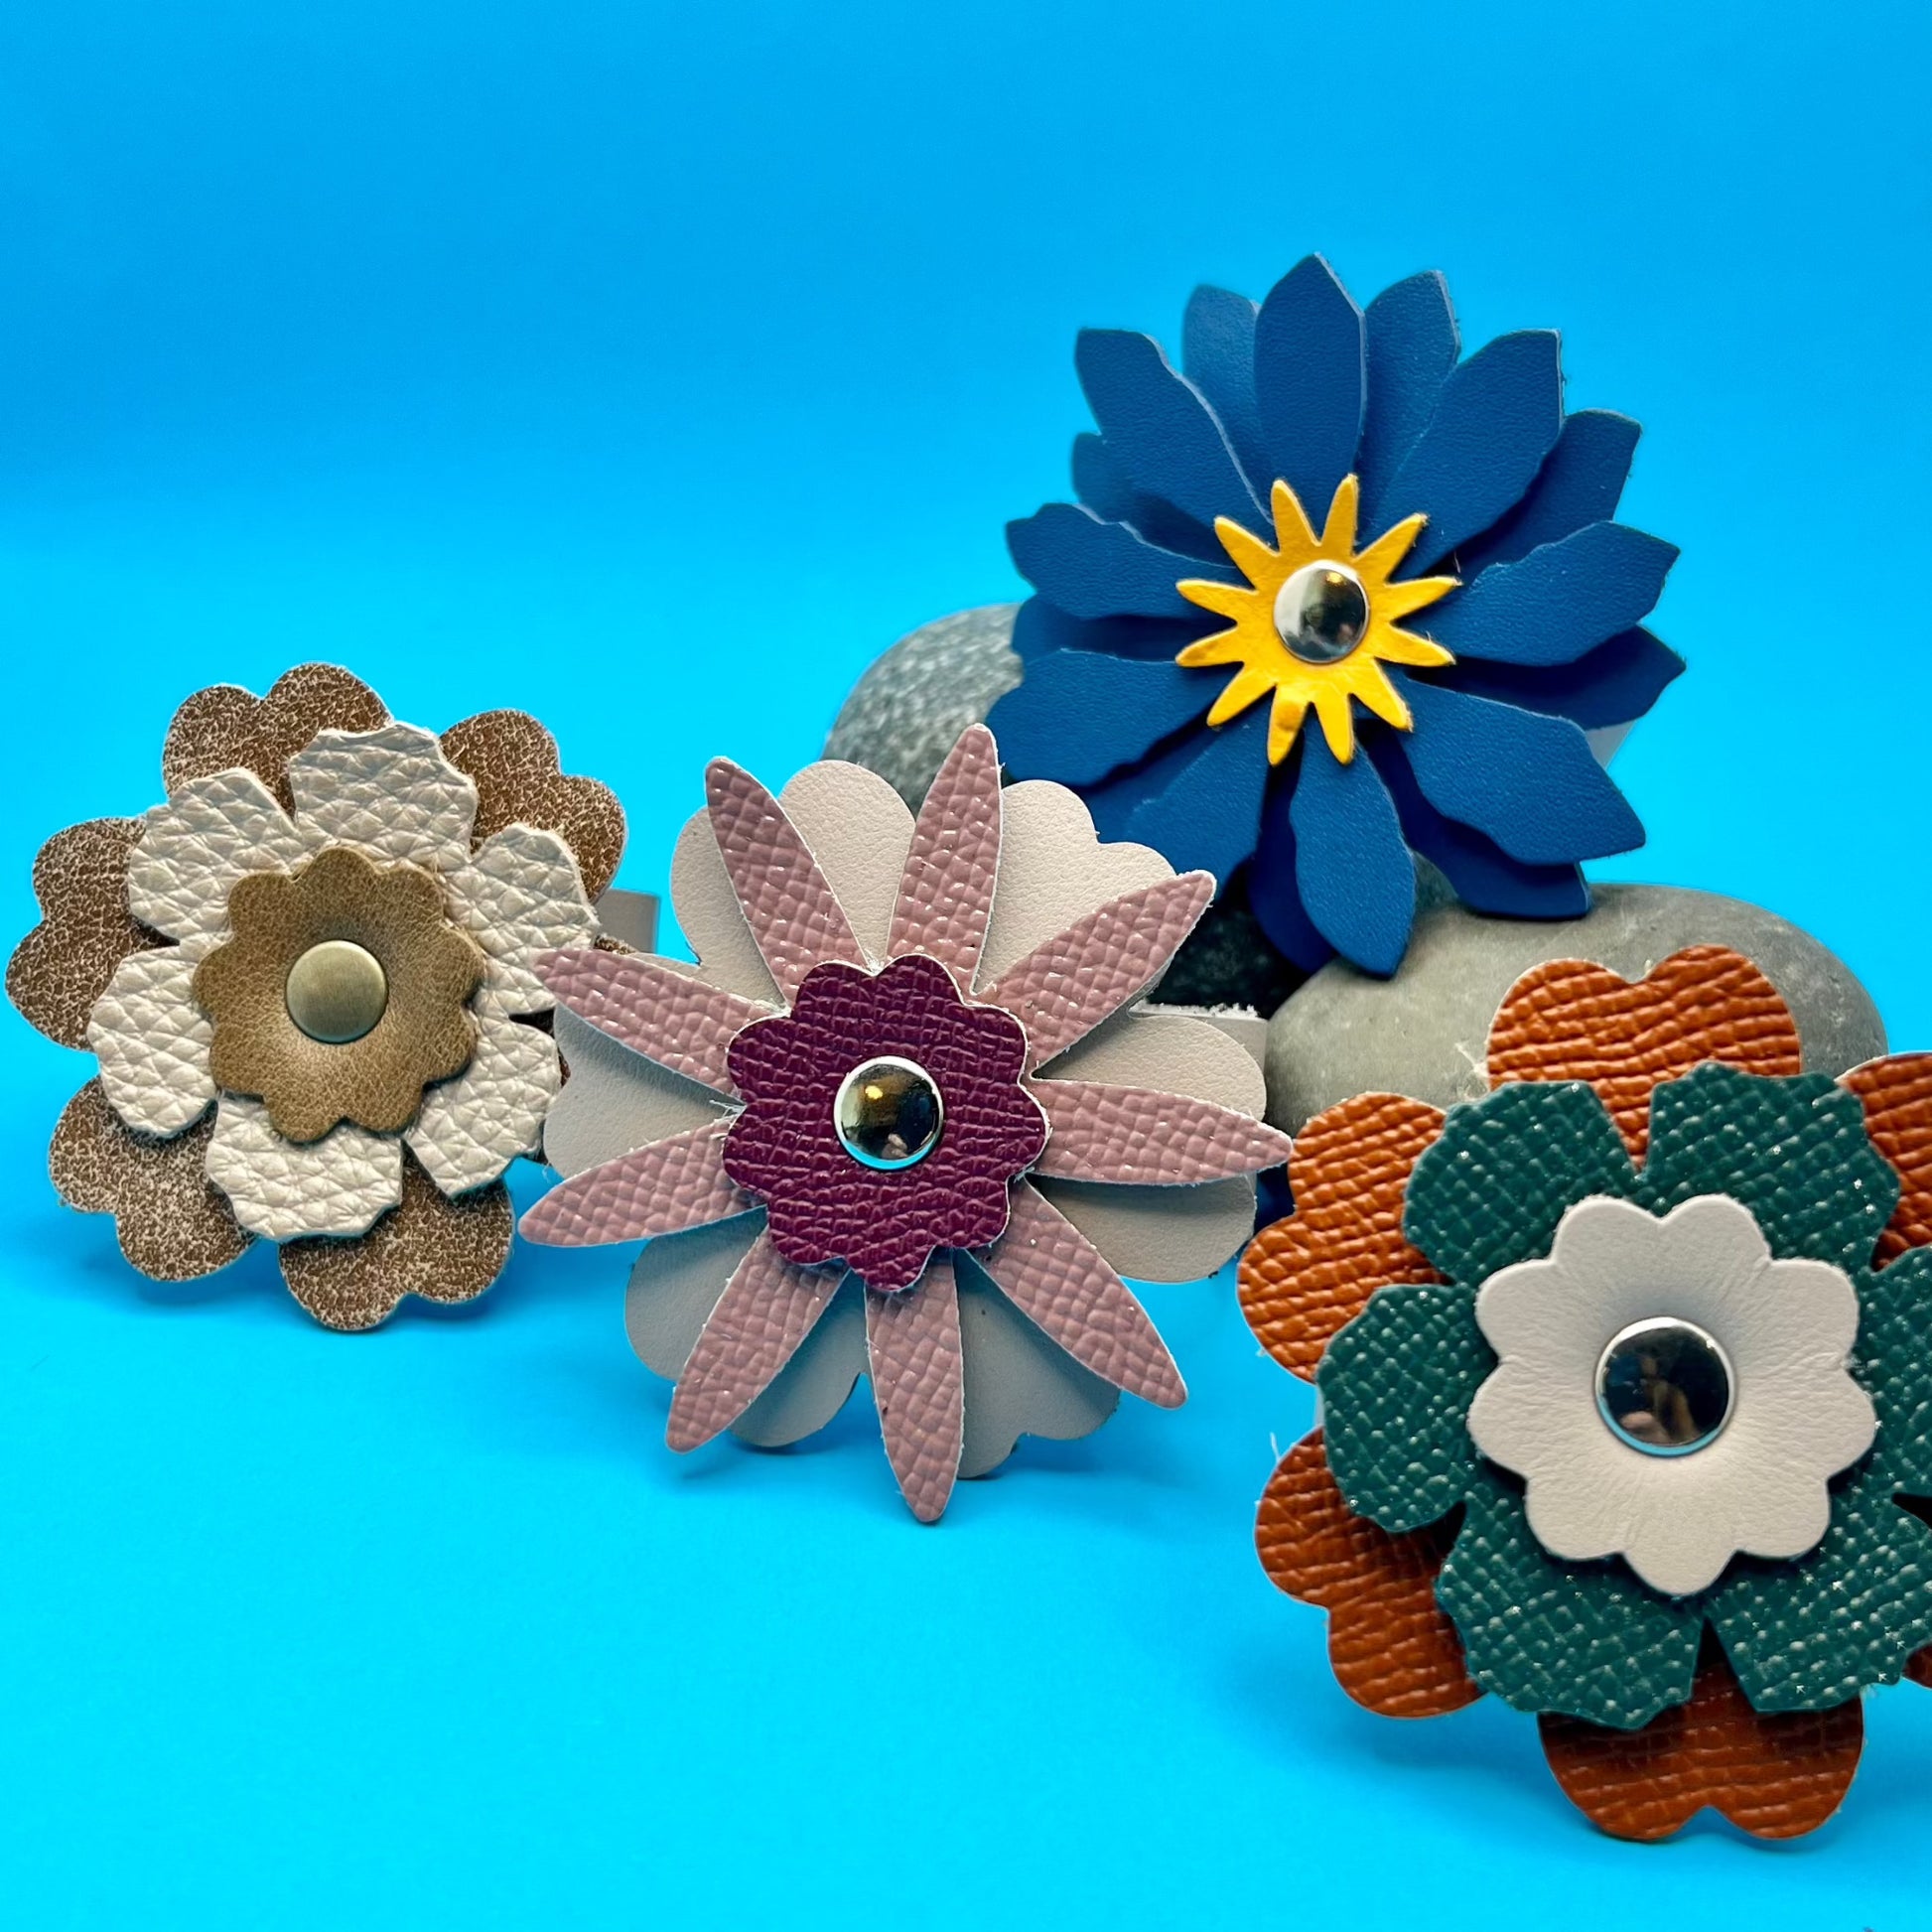 leather flower cuffs for scarves, shawls and handbags